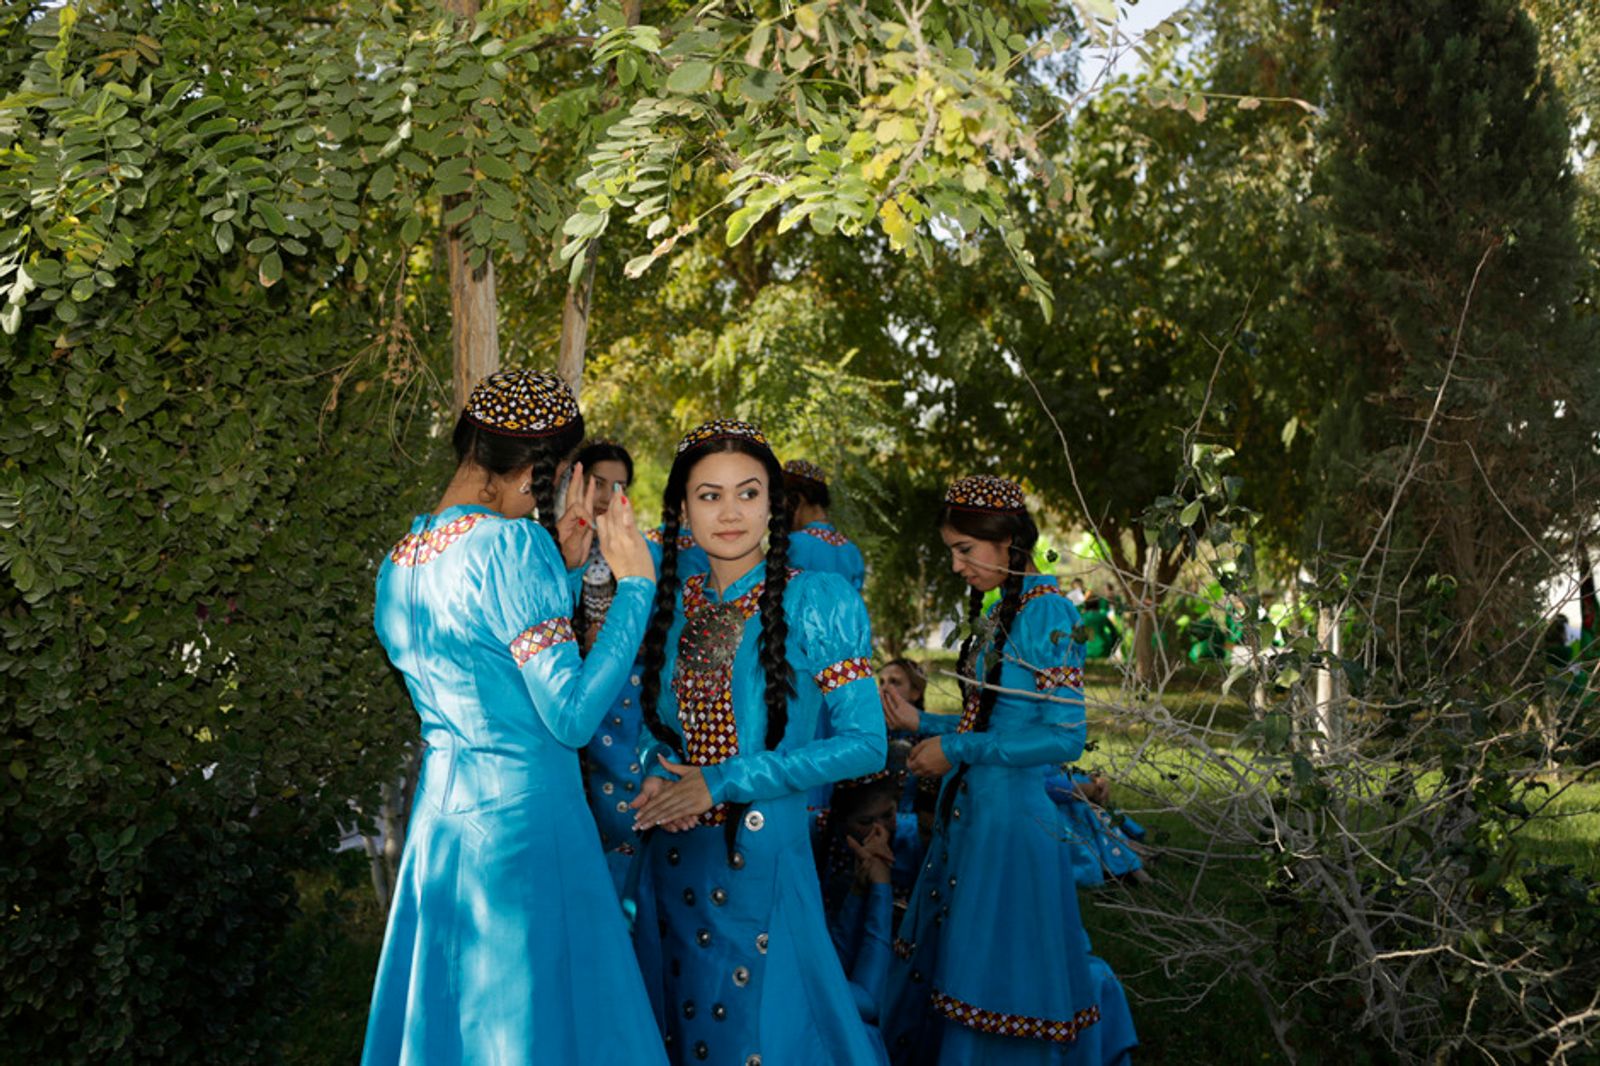 © Eleonora Strano - Image from the A turkmen story photography project